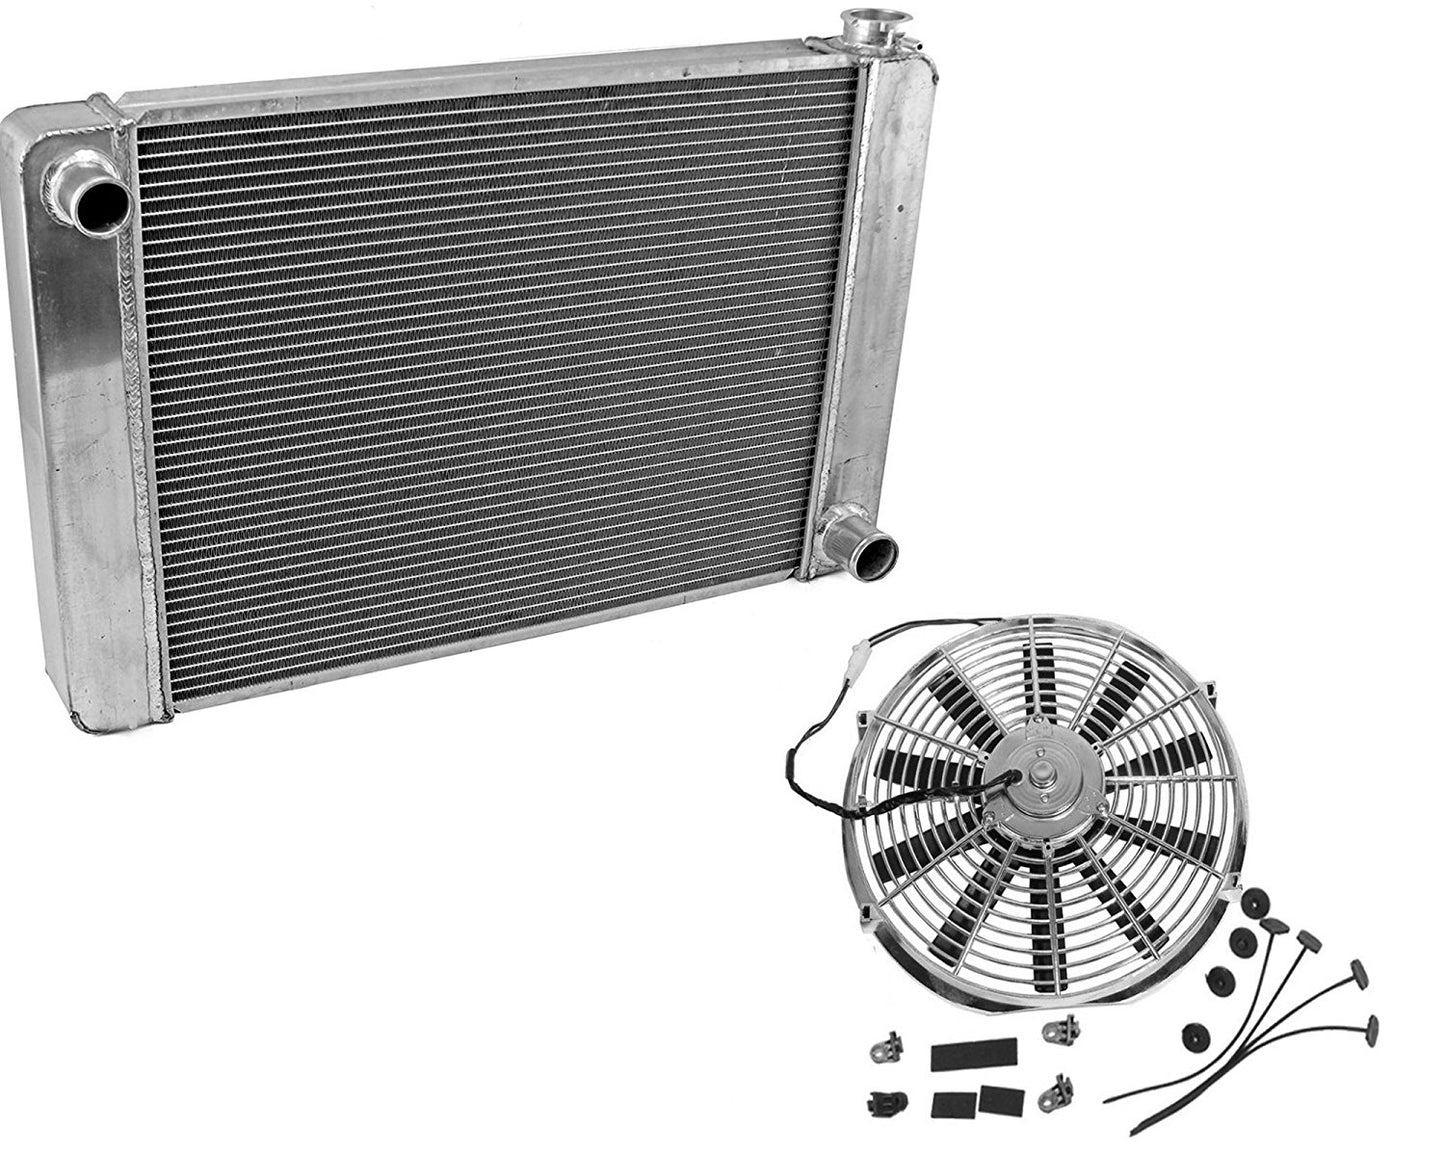 Fabricated Aluminum Radiator 30" x 19" x3" Overall For SBC BBC Chevy GM & 16" Chrome Straight Blade Reversible Cooling radiator Fan